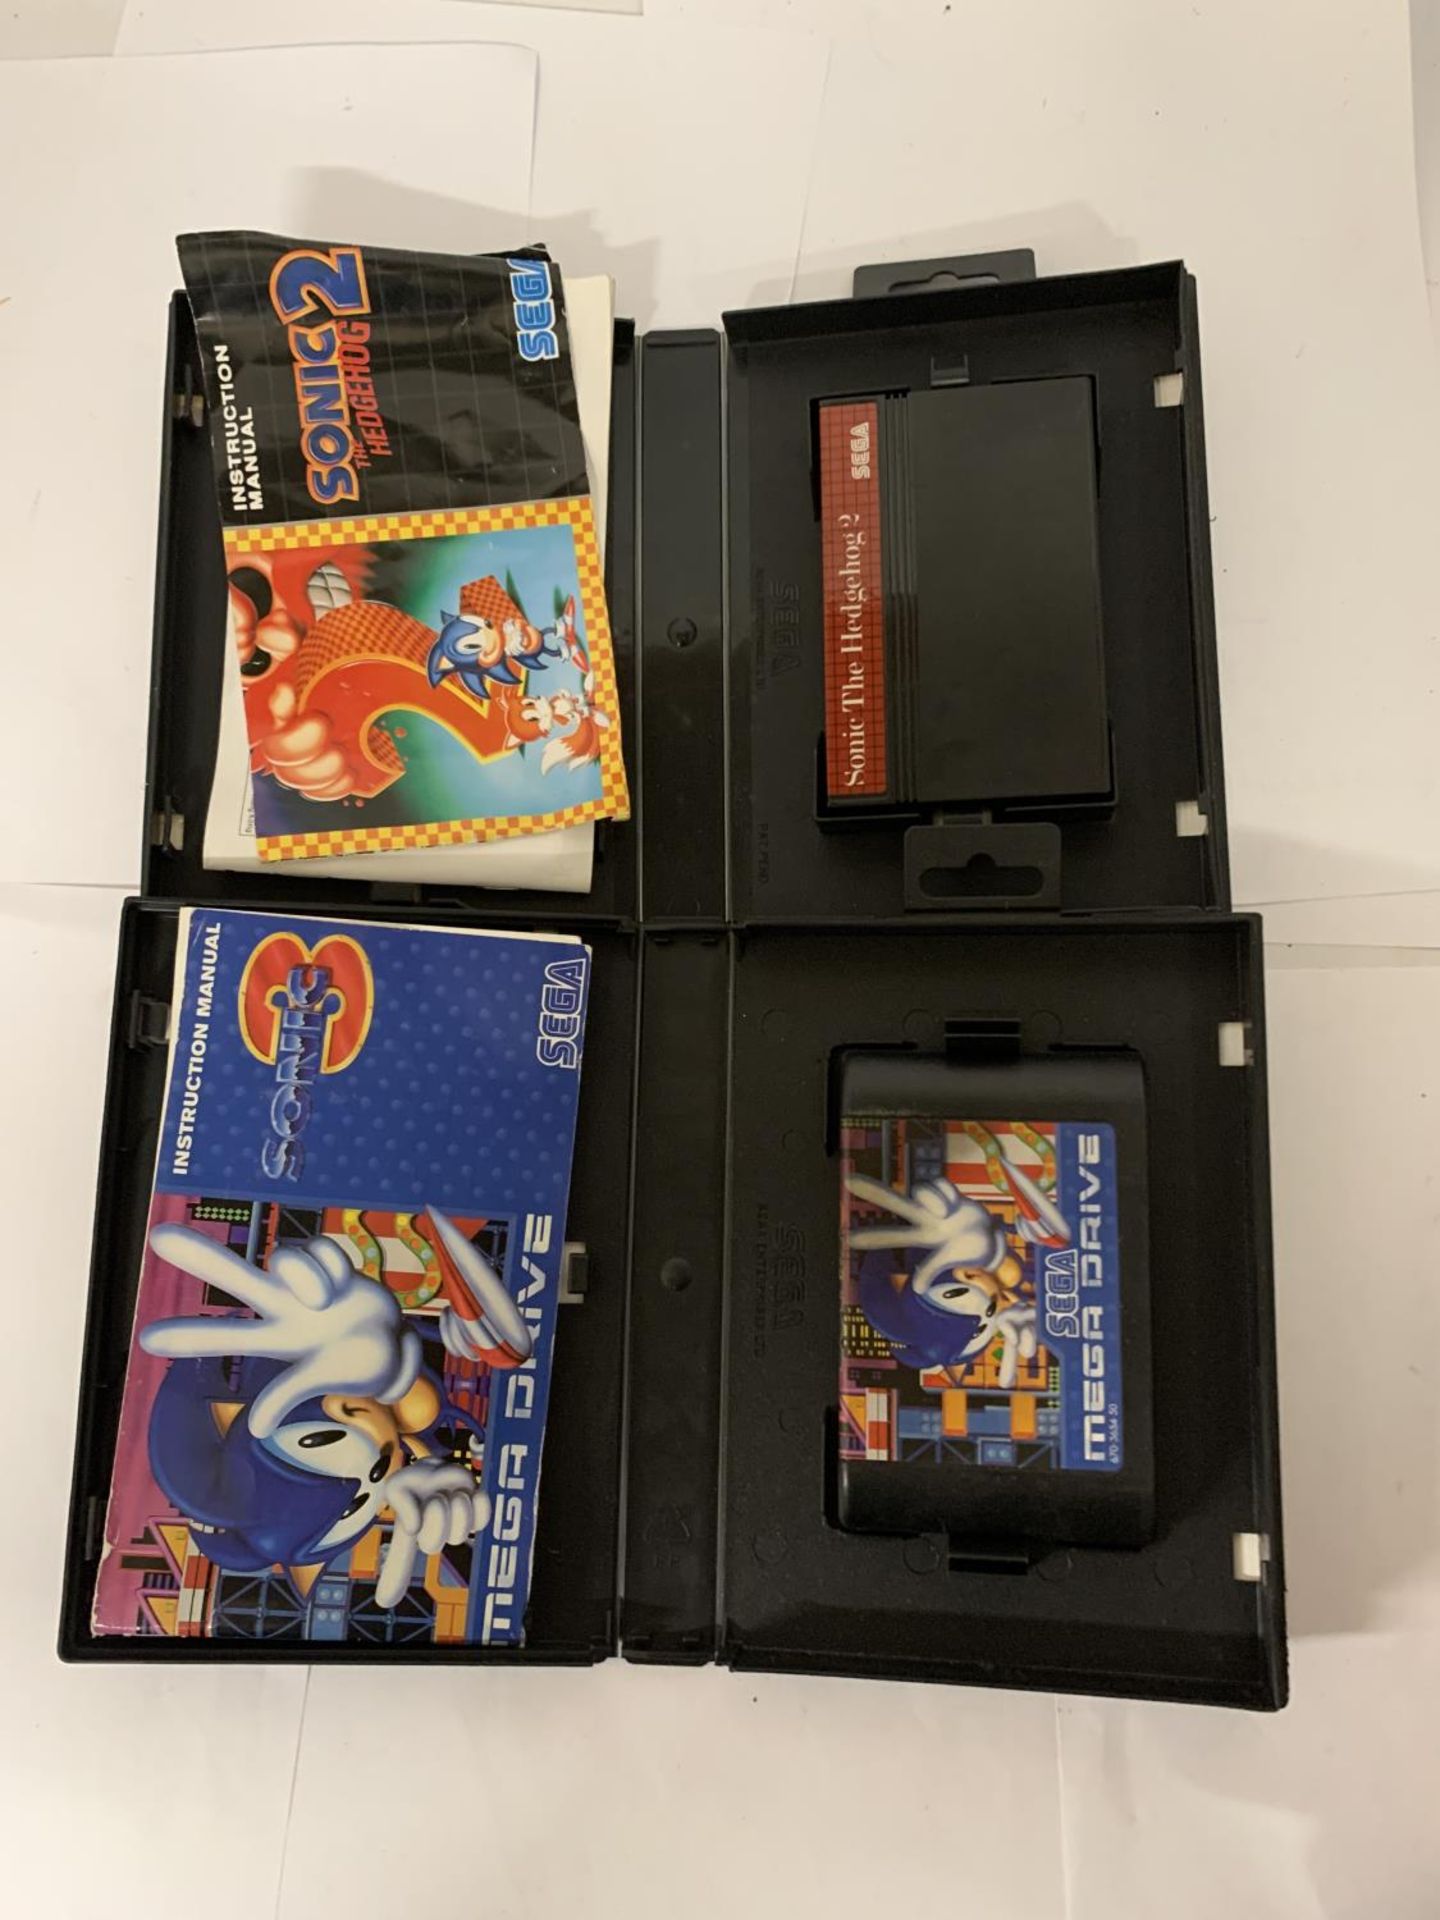 SIX BOXED SEGA GAMES TO INCLUDE SONIC THE HEDGEHOG 2, SONIC 3, CHICK CHIKI BOYS, ETC., - Image 5 of 5